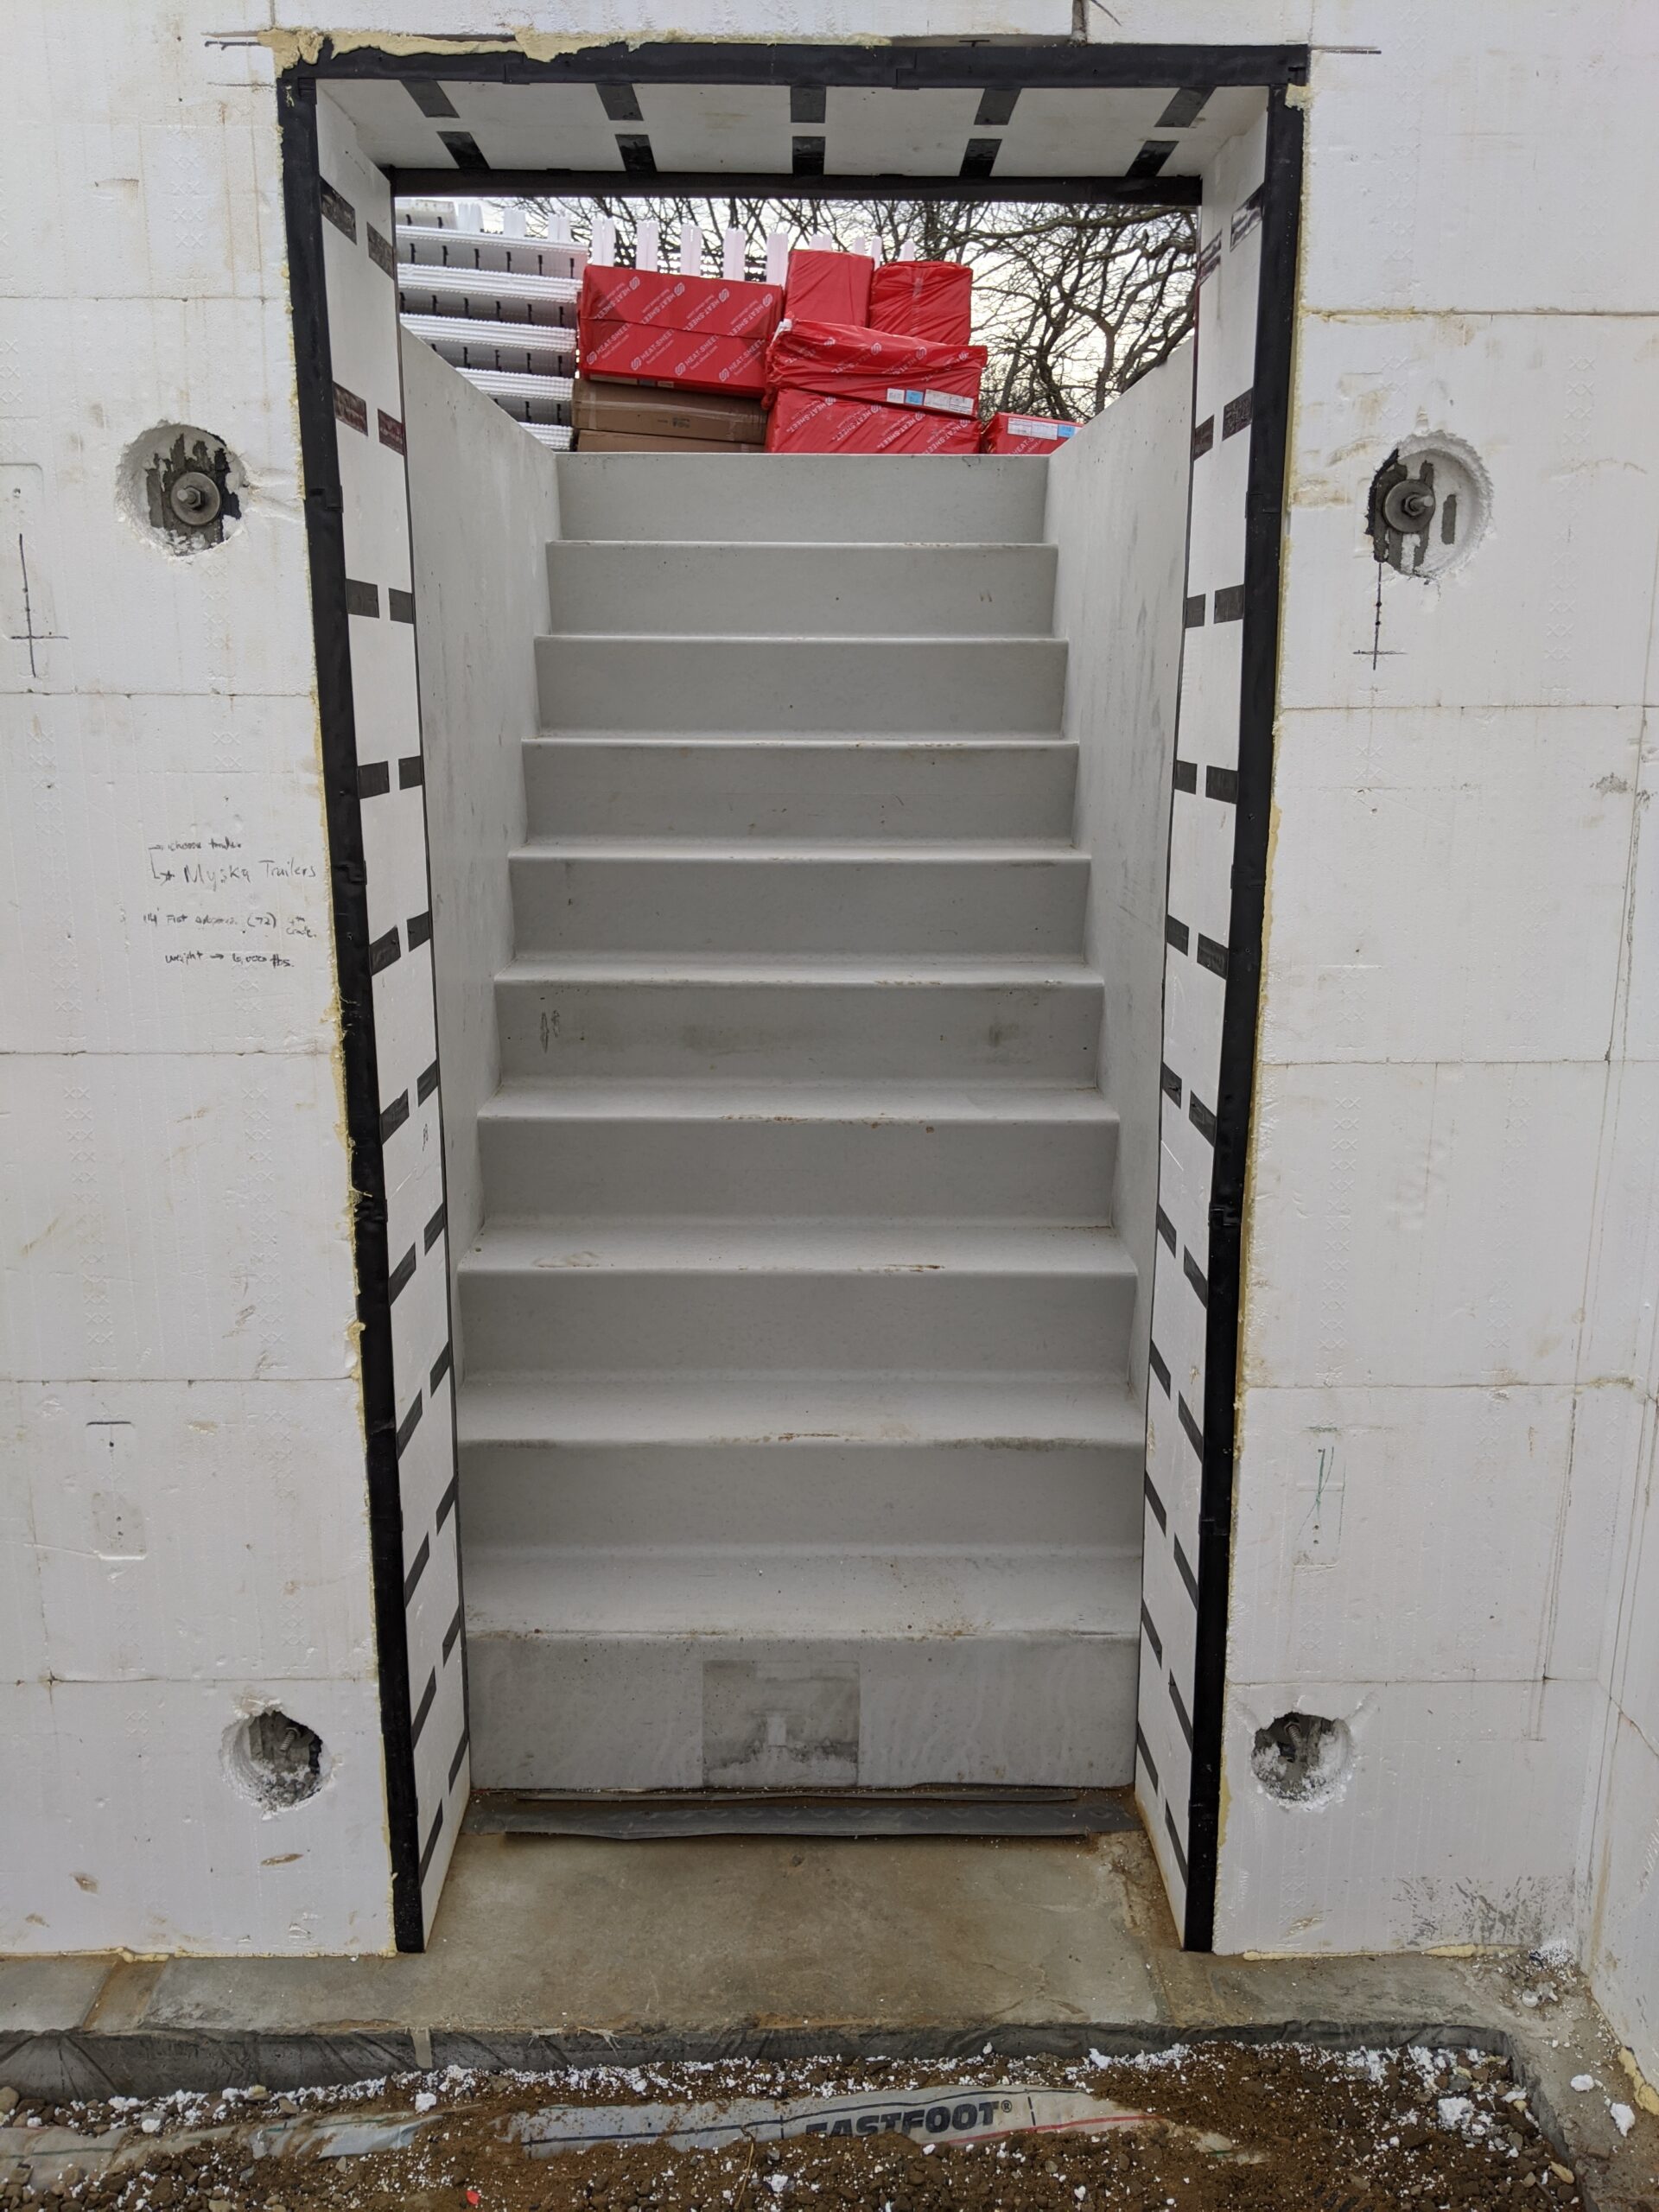 interior view of a Basement Stairwell attached to an ICF foundation.